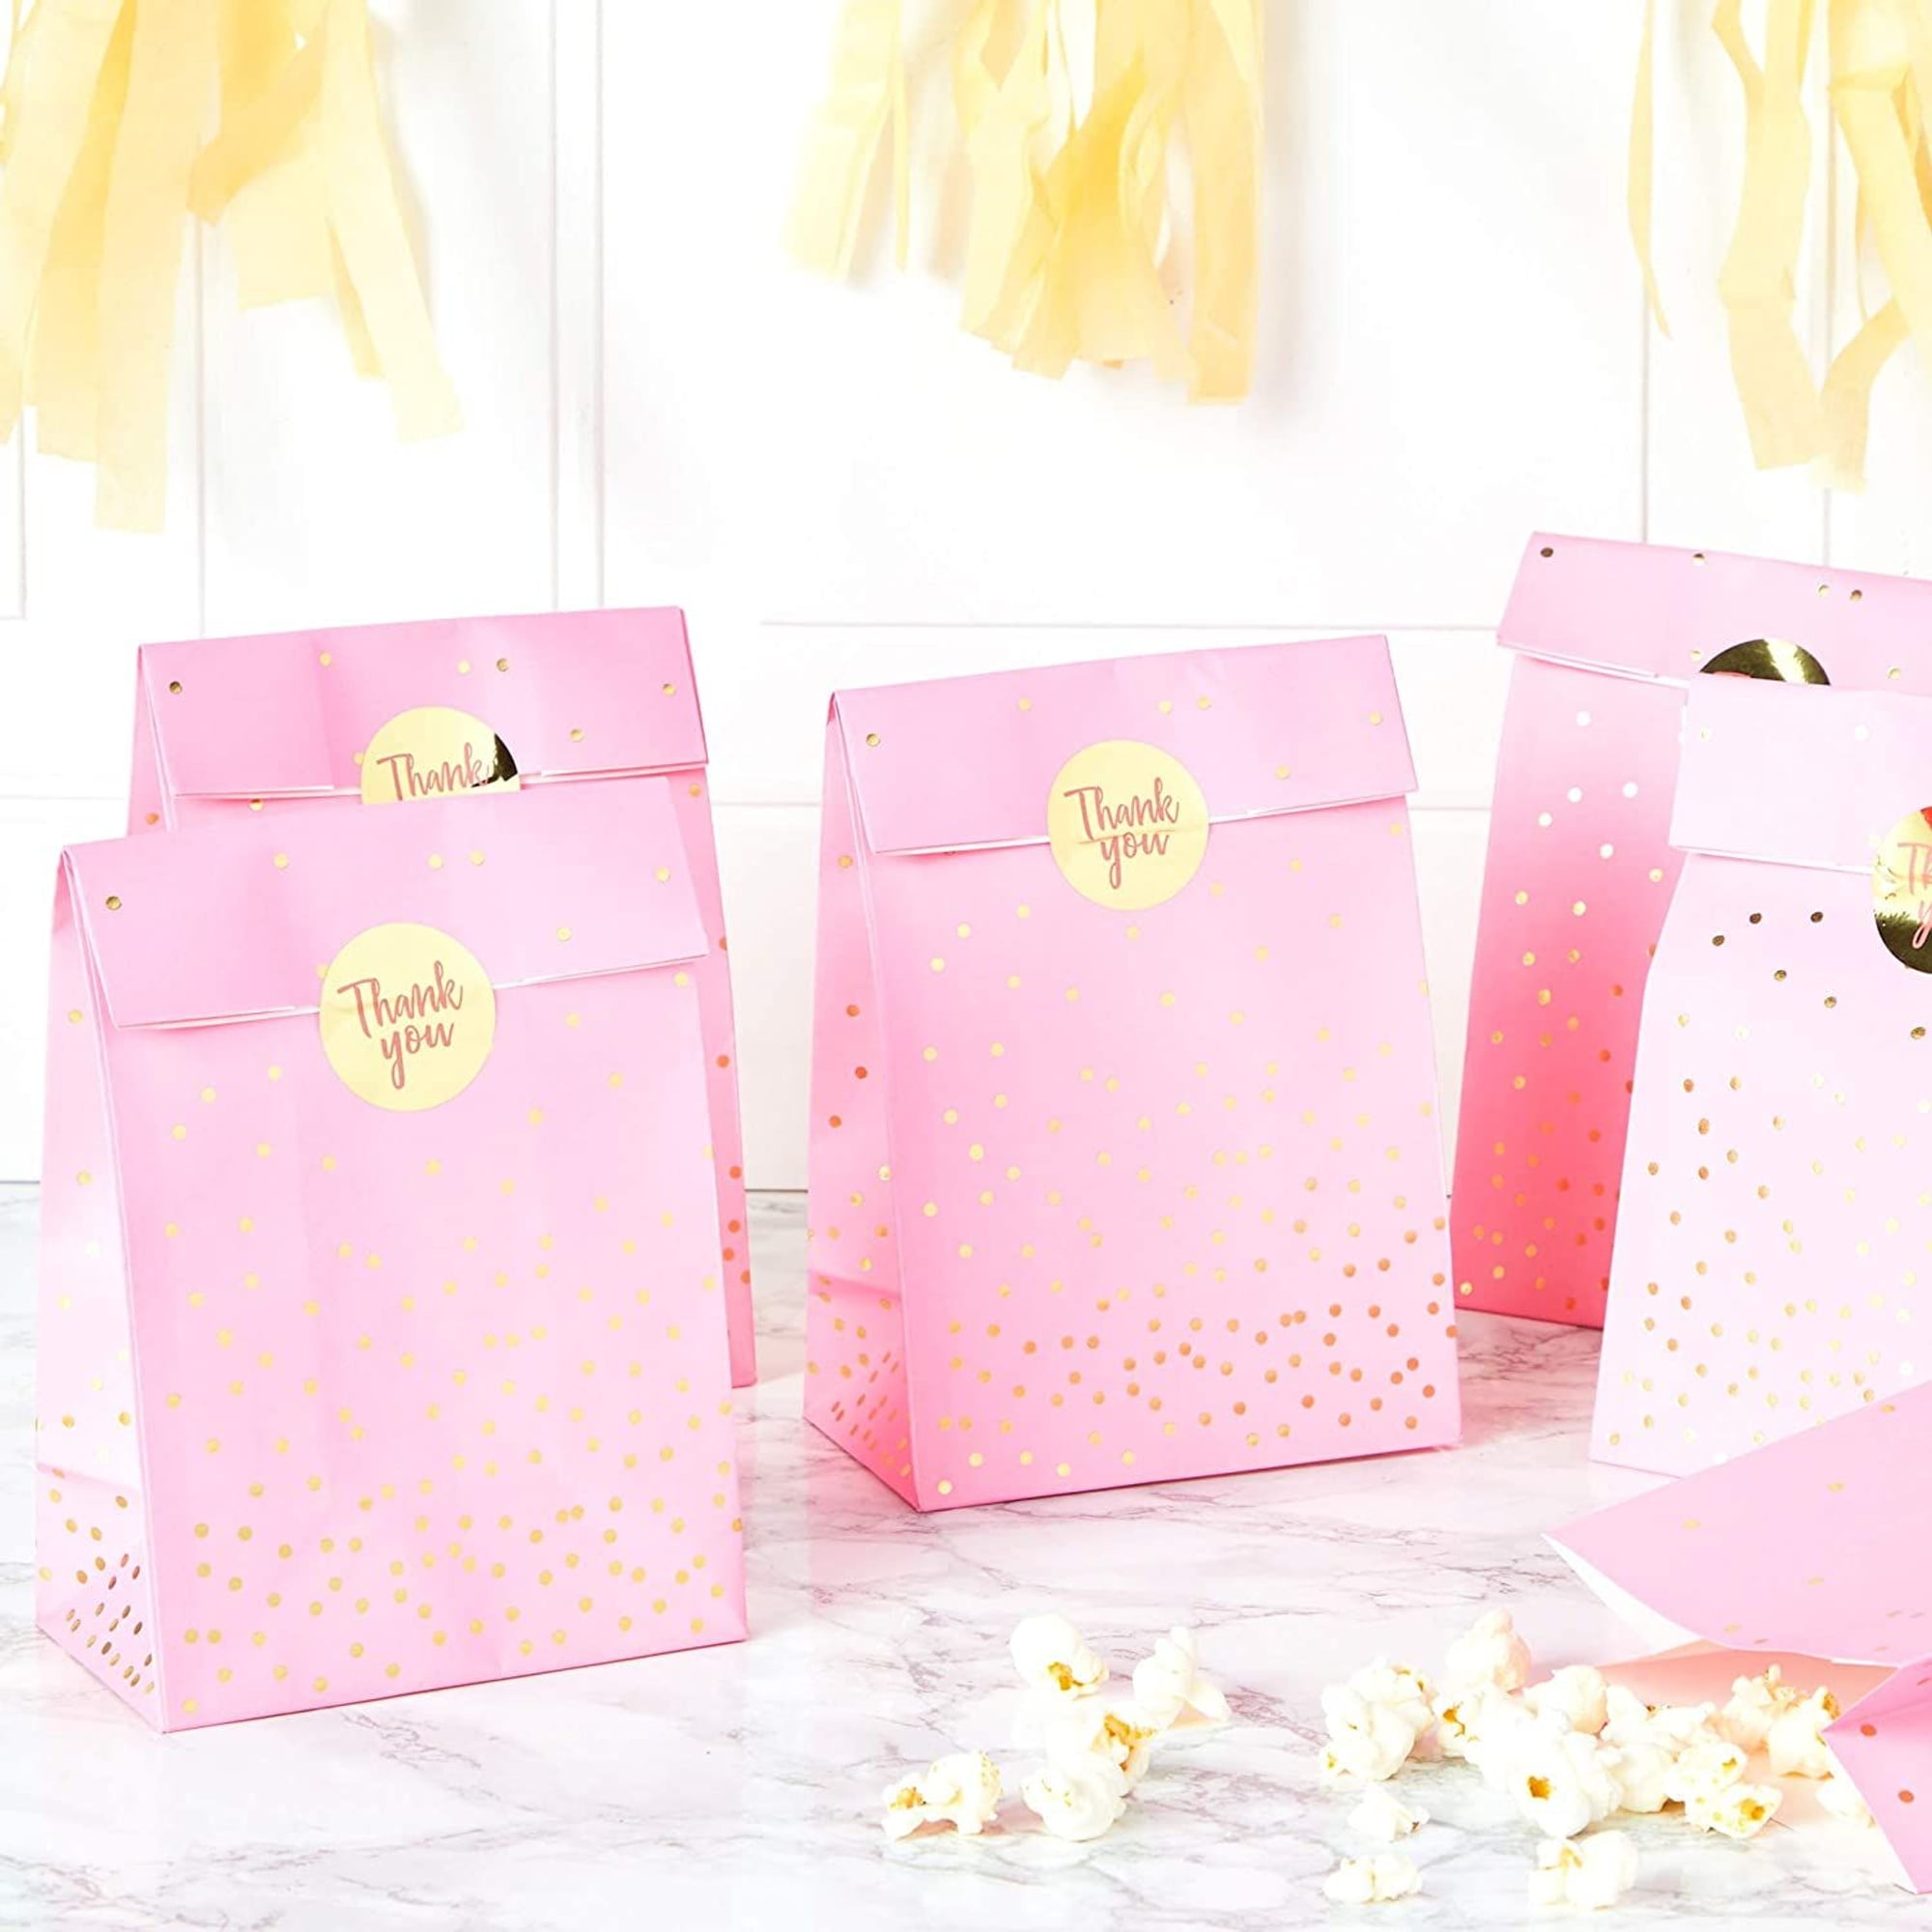 Tilly & Tigg Pink Paper Goodie Bags - 8 Pack